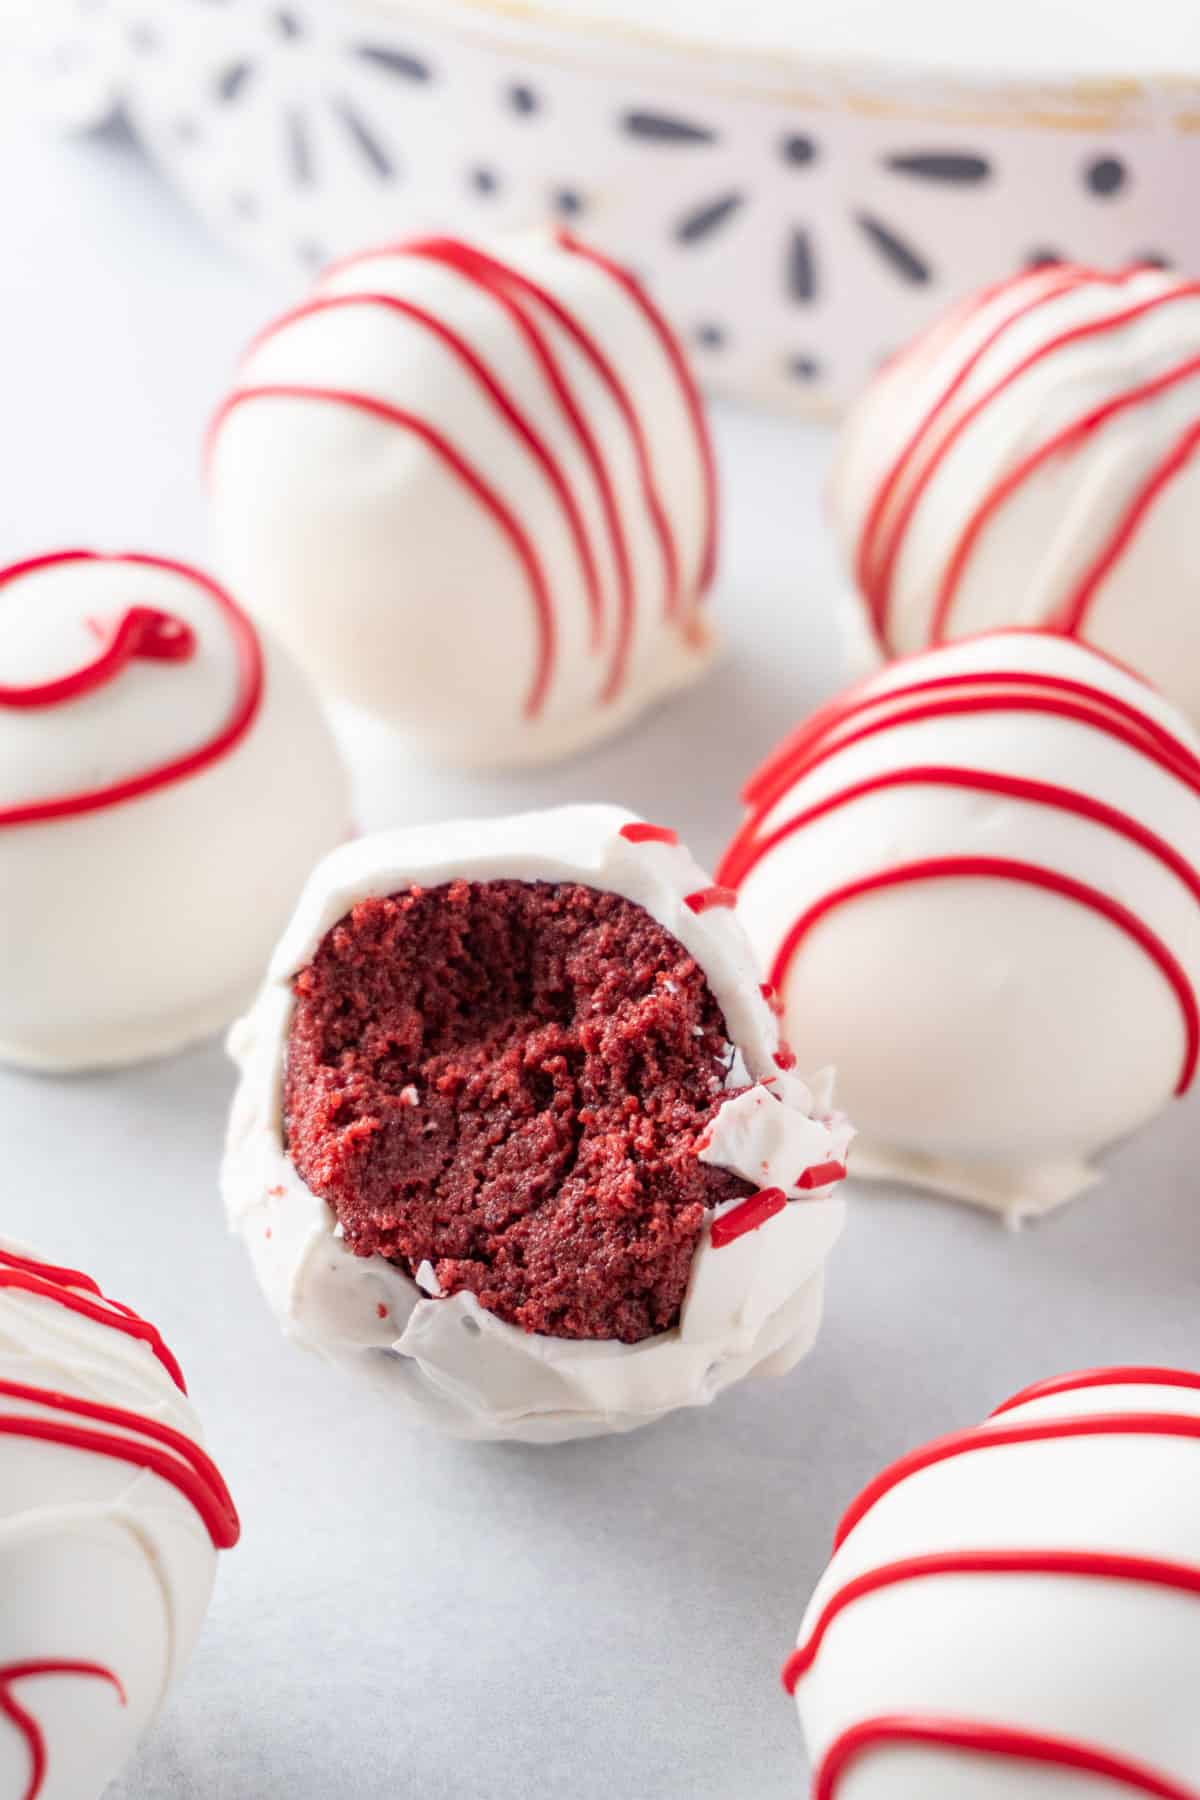 red velvets cake balls one with a bite taken out